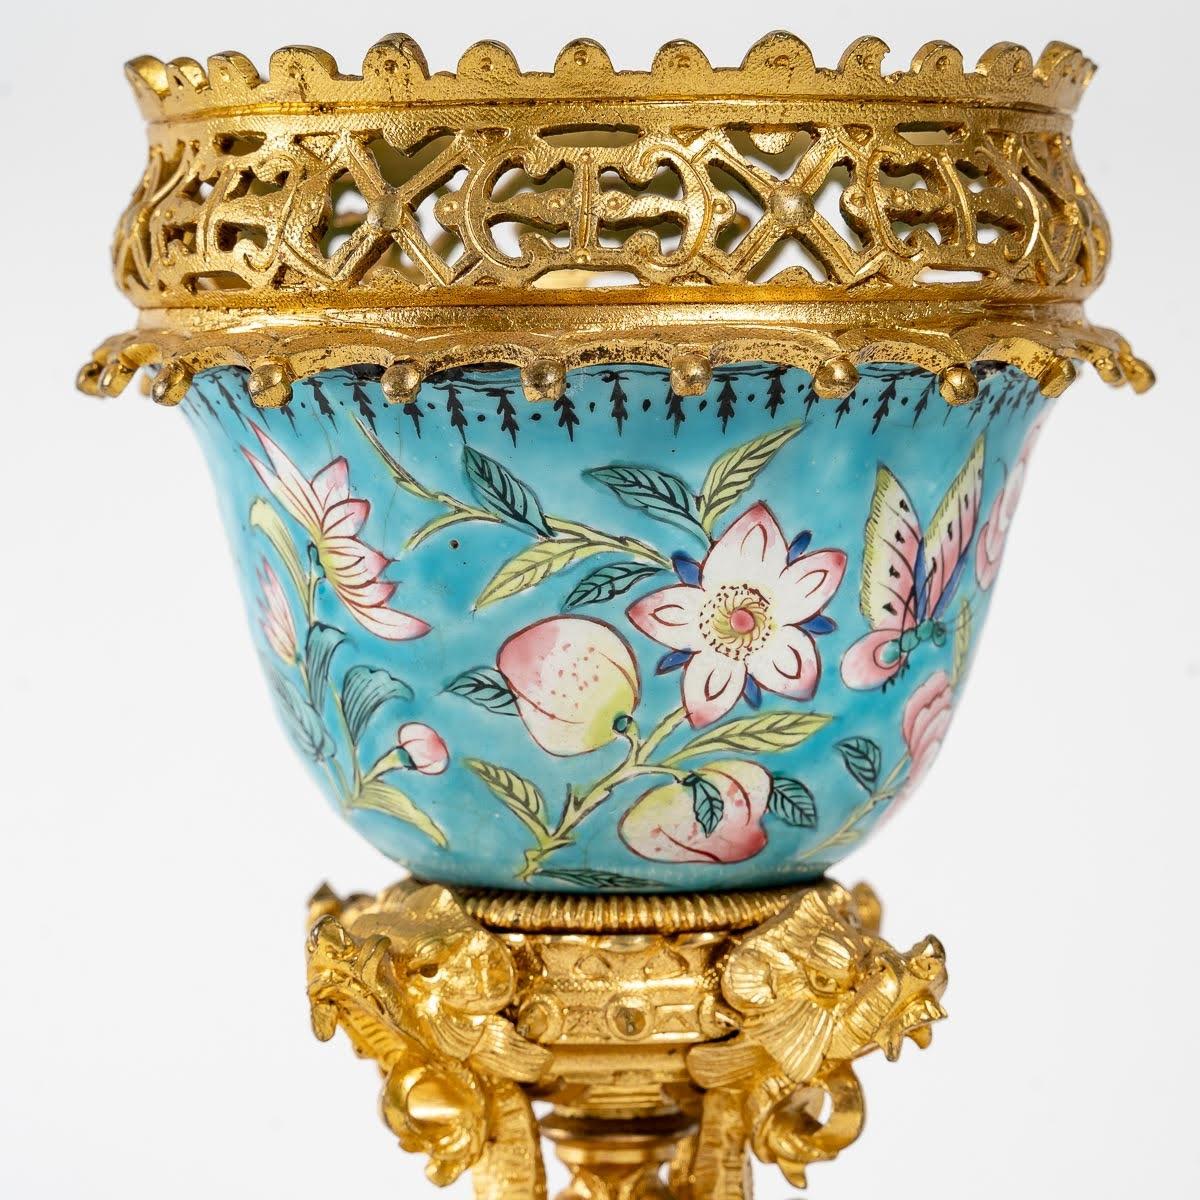 Asian Art Porcelain and Chased and Gilt Bronze Bowl, 19th Century. For Sale 1